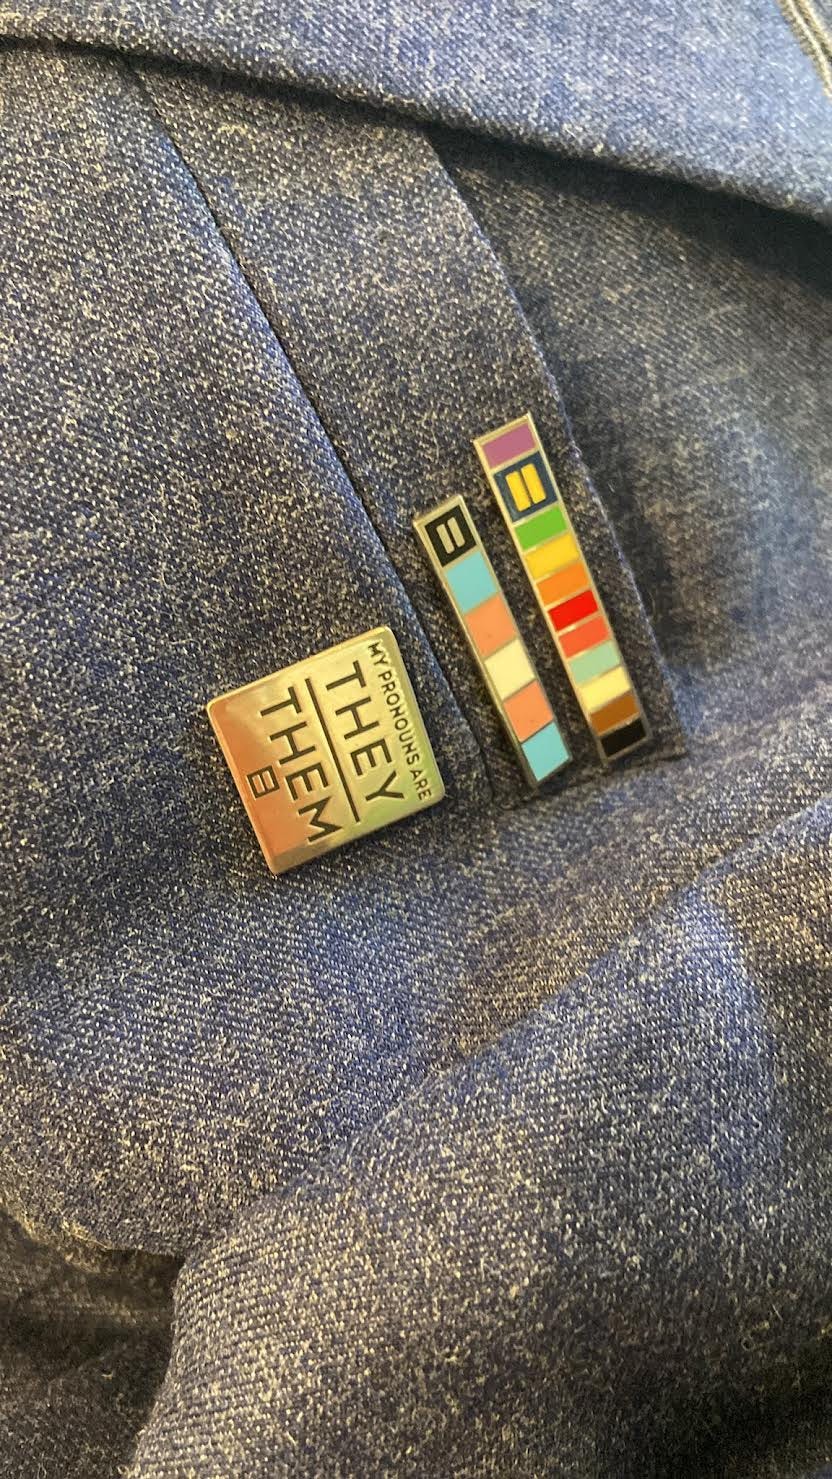 three pins; one with stripes of the progress flag colors, a second with stripes of the trans flag colors, and the third reading as "my pronouns are they/them"; all sporting the human rights campaign logo